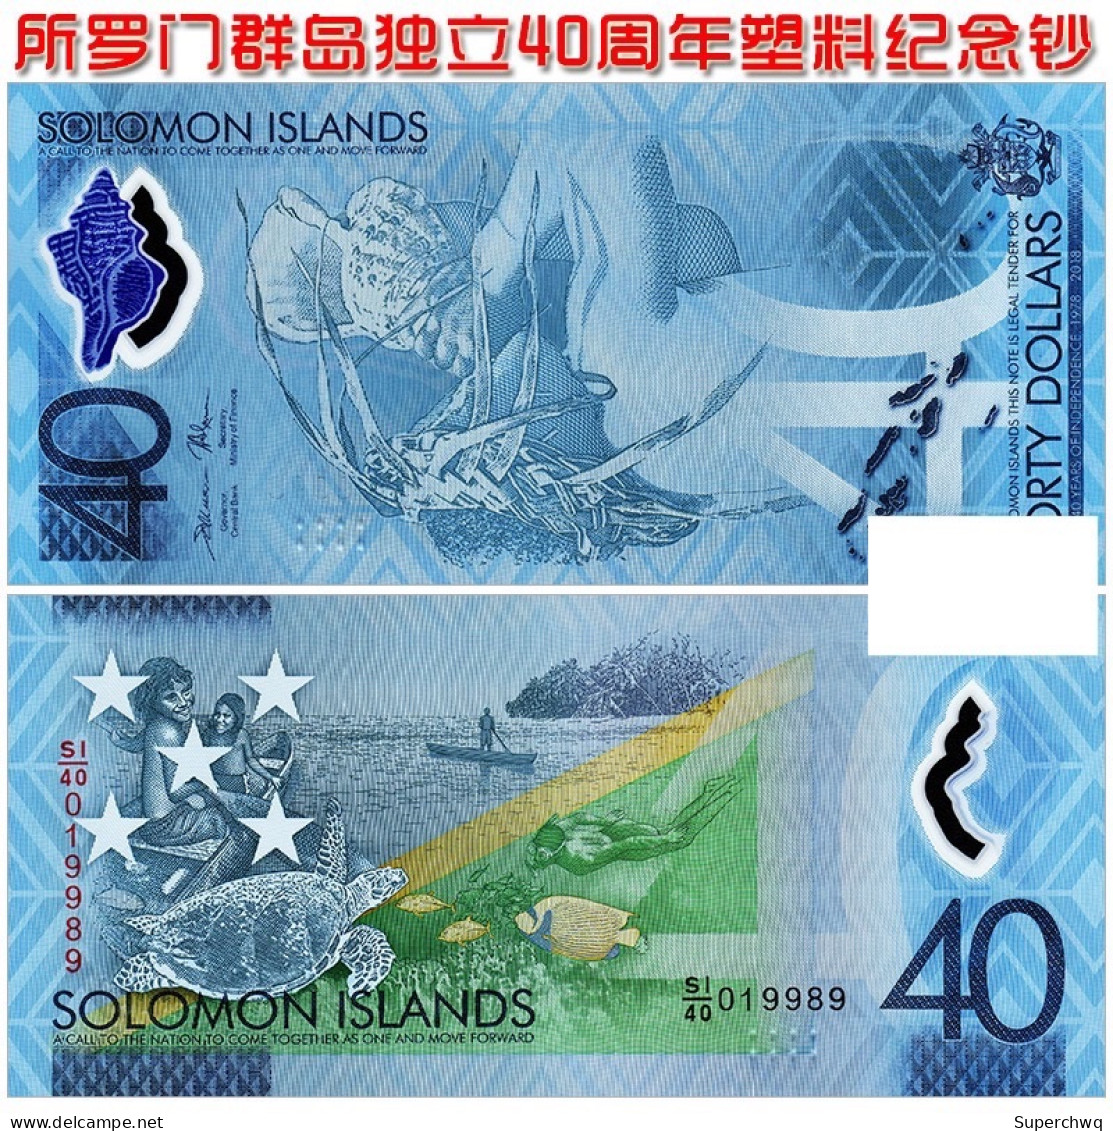 Oceania Solomon Islands 40 Yuan 2018 Independence 40th Anniversary Plastic Commemorative Note， Approximately 145 X67mm I - Salomons